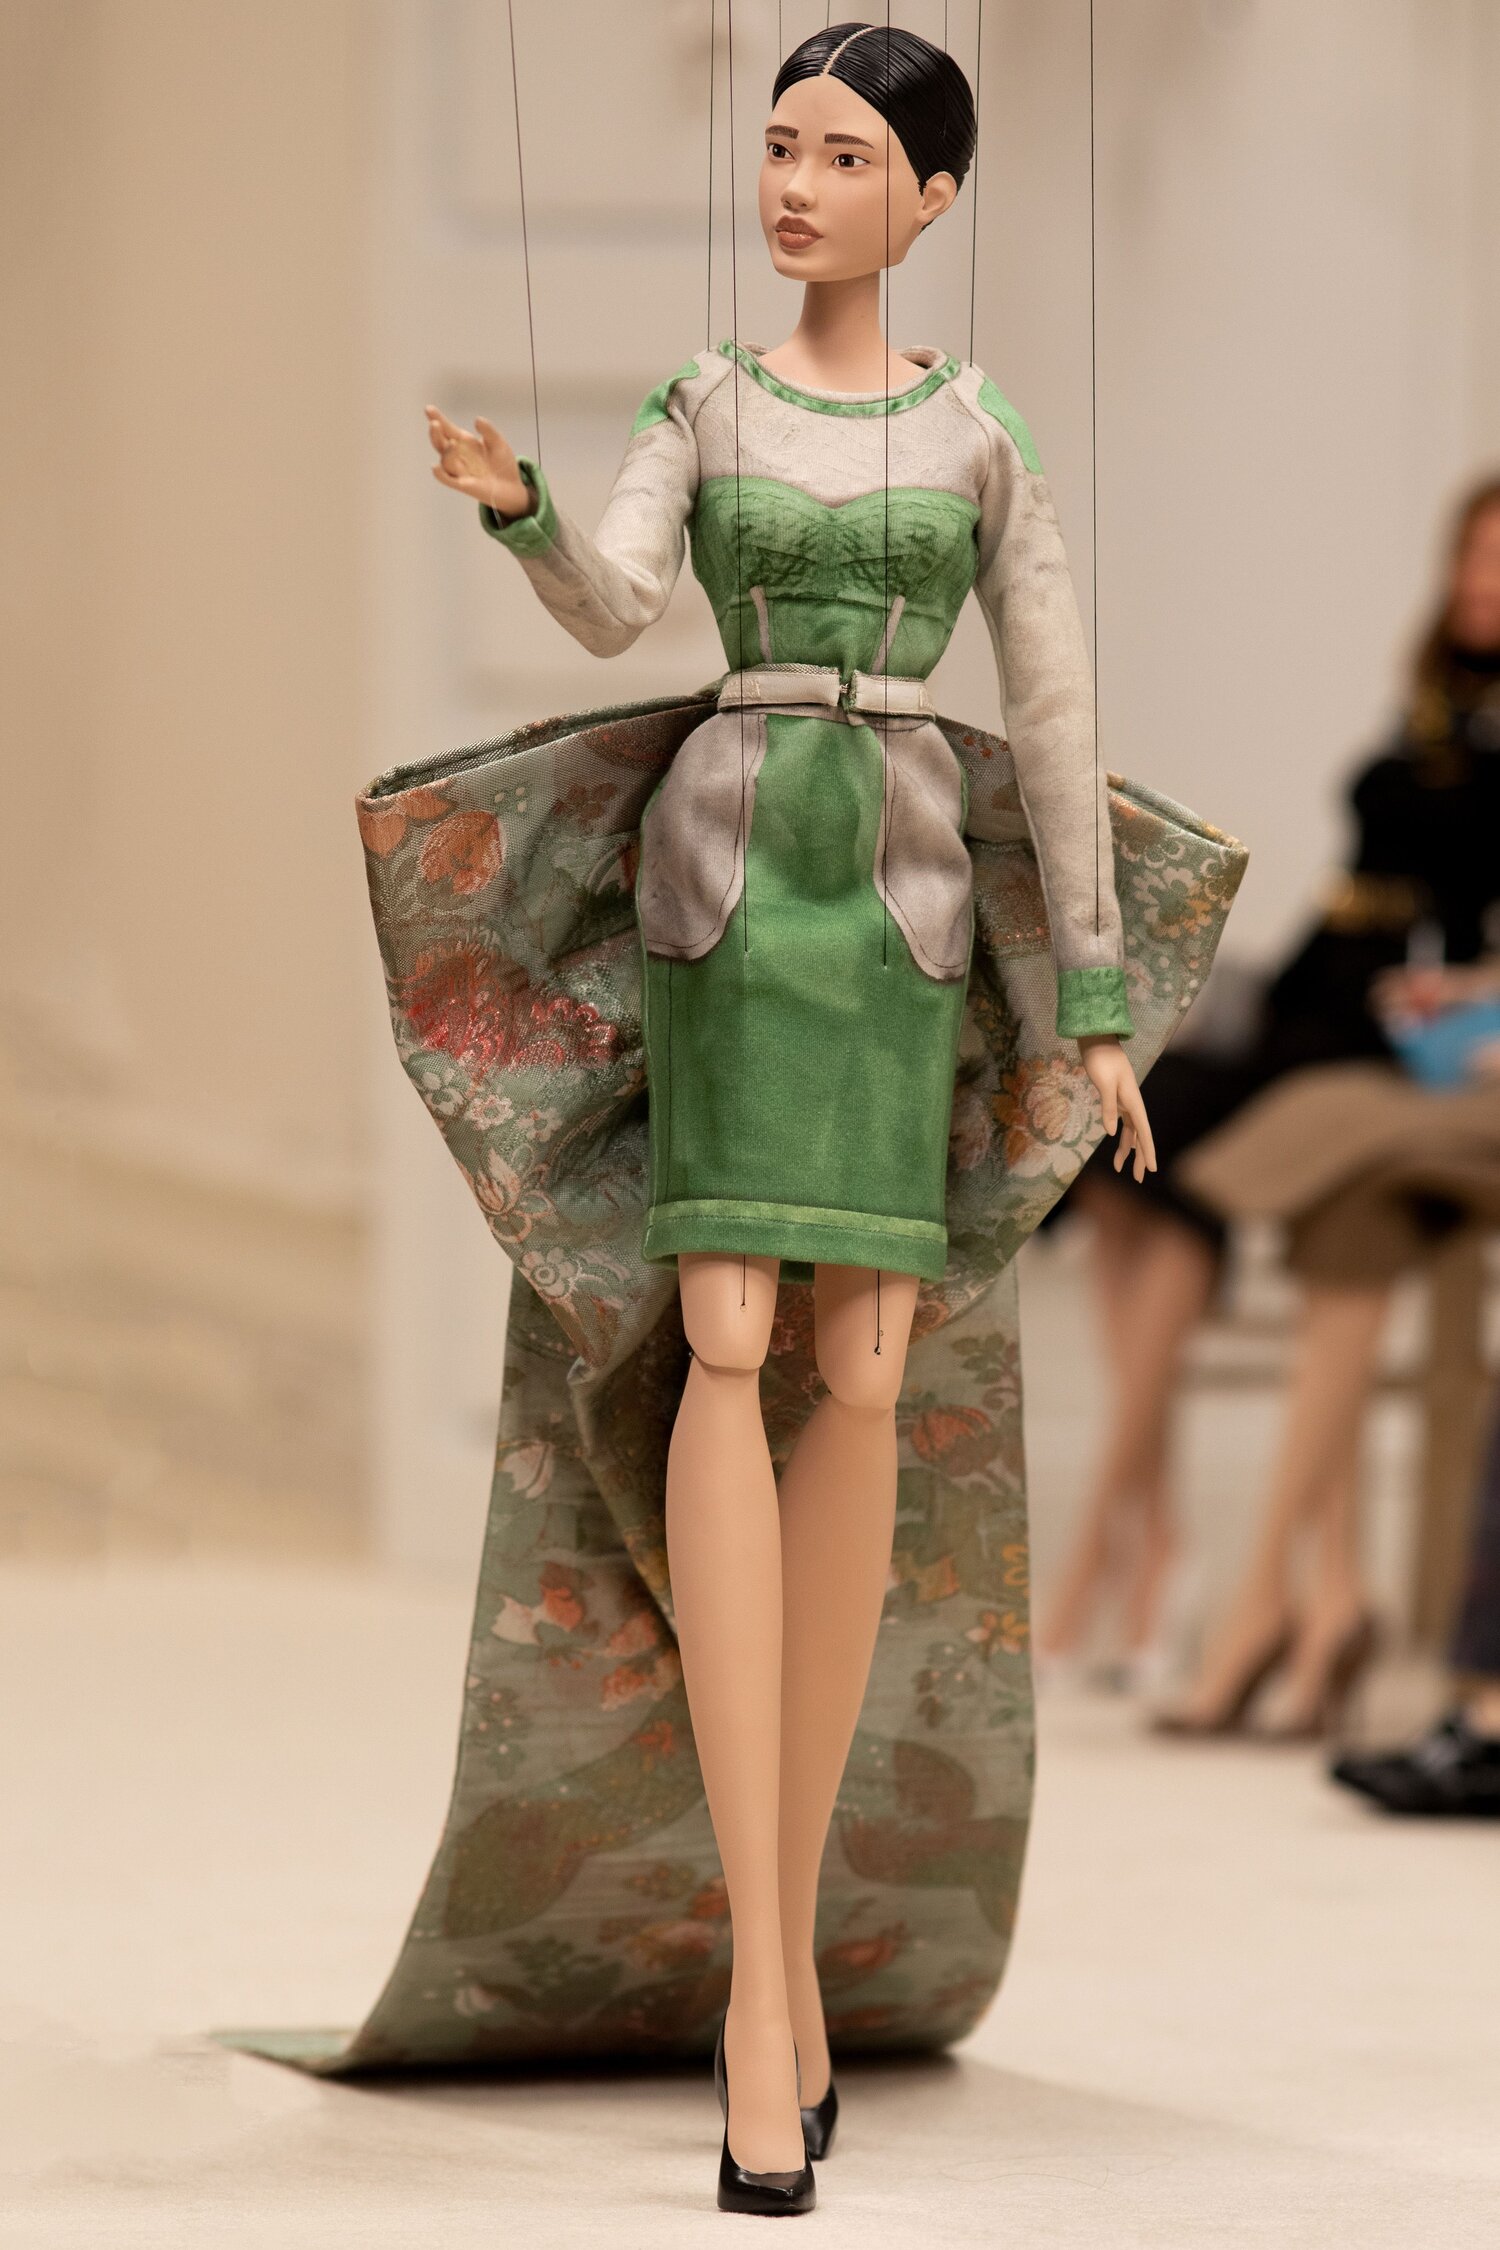 Jeremy Scott creates Moschino Barbie, due to release exclusively on  Net-a-Porter